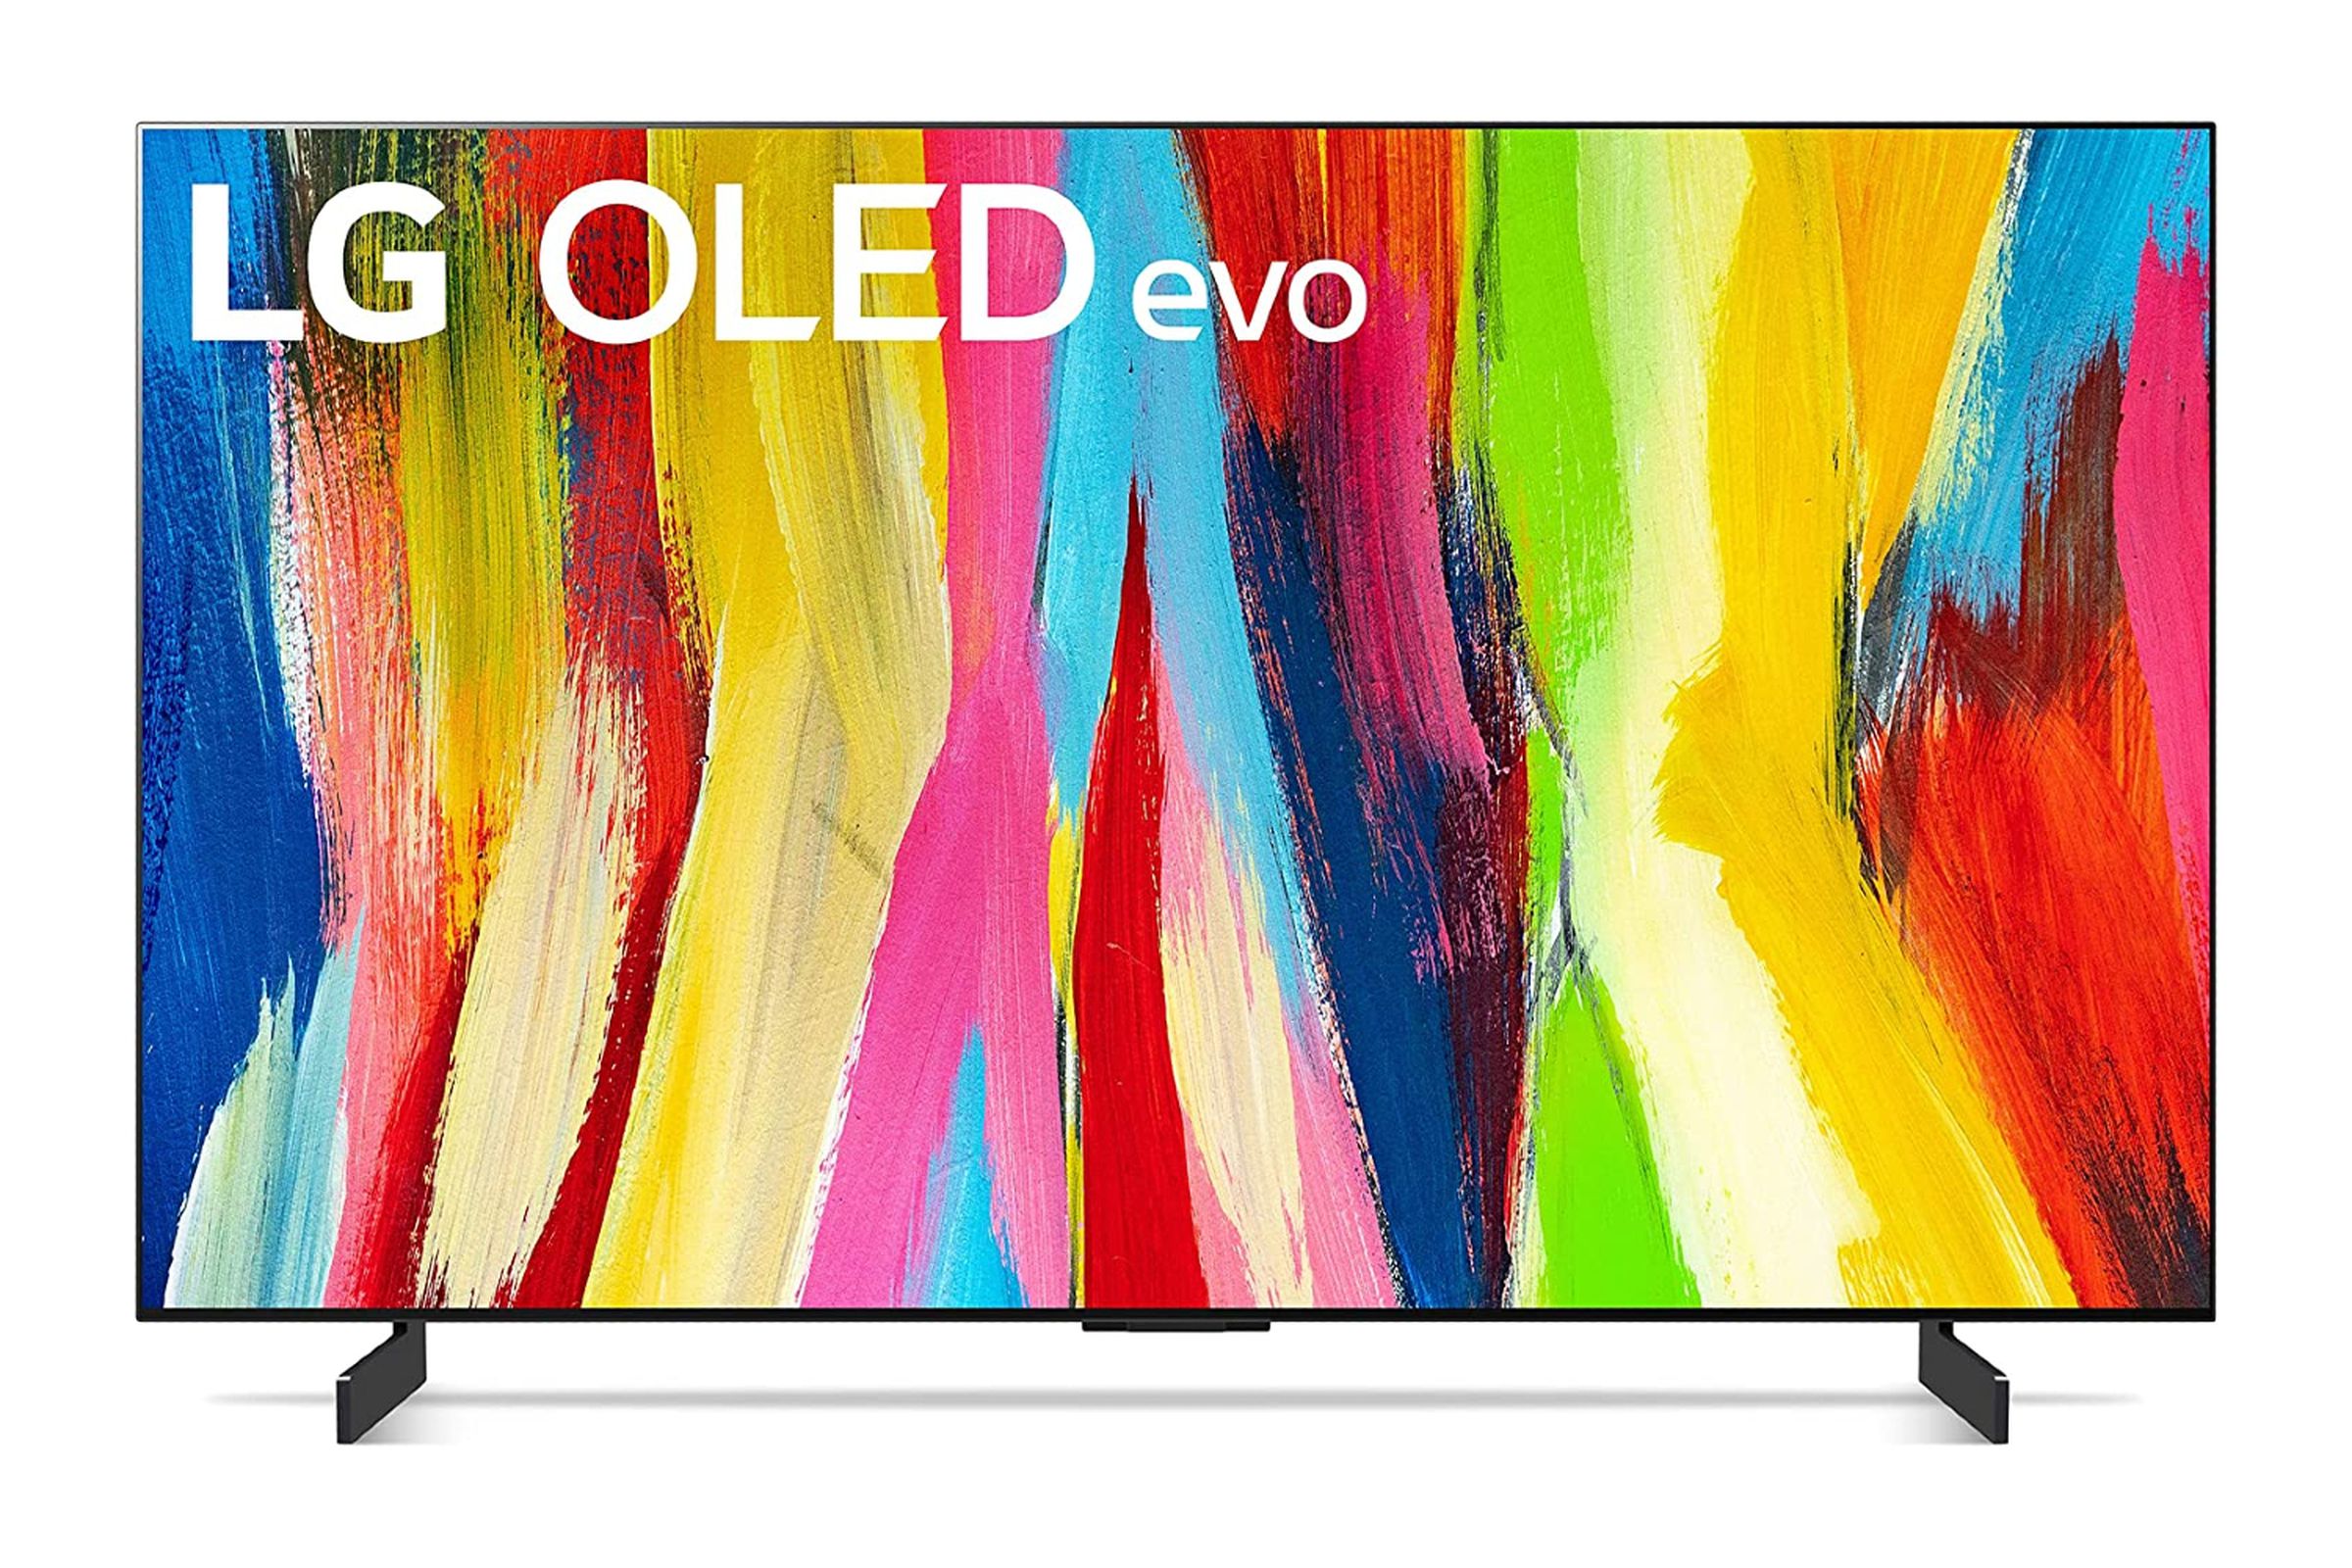 LG’s brilliant C2 OLED is on sale in the 42-inch configuration for just $796.99 right now.